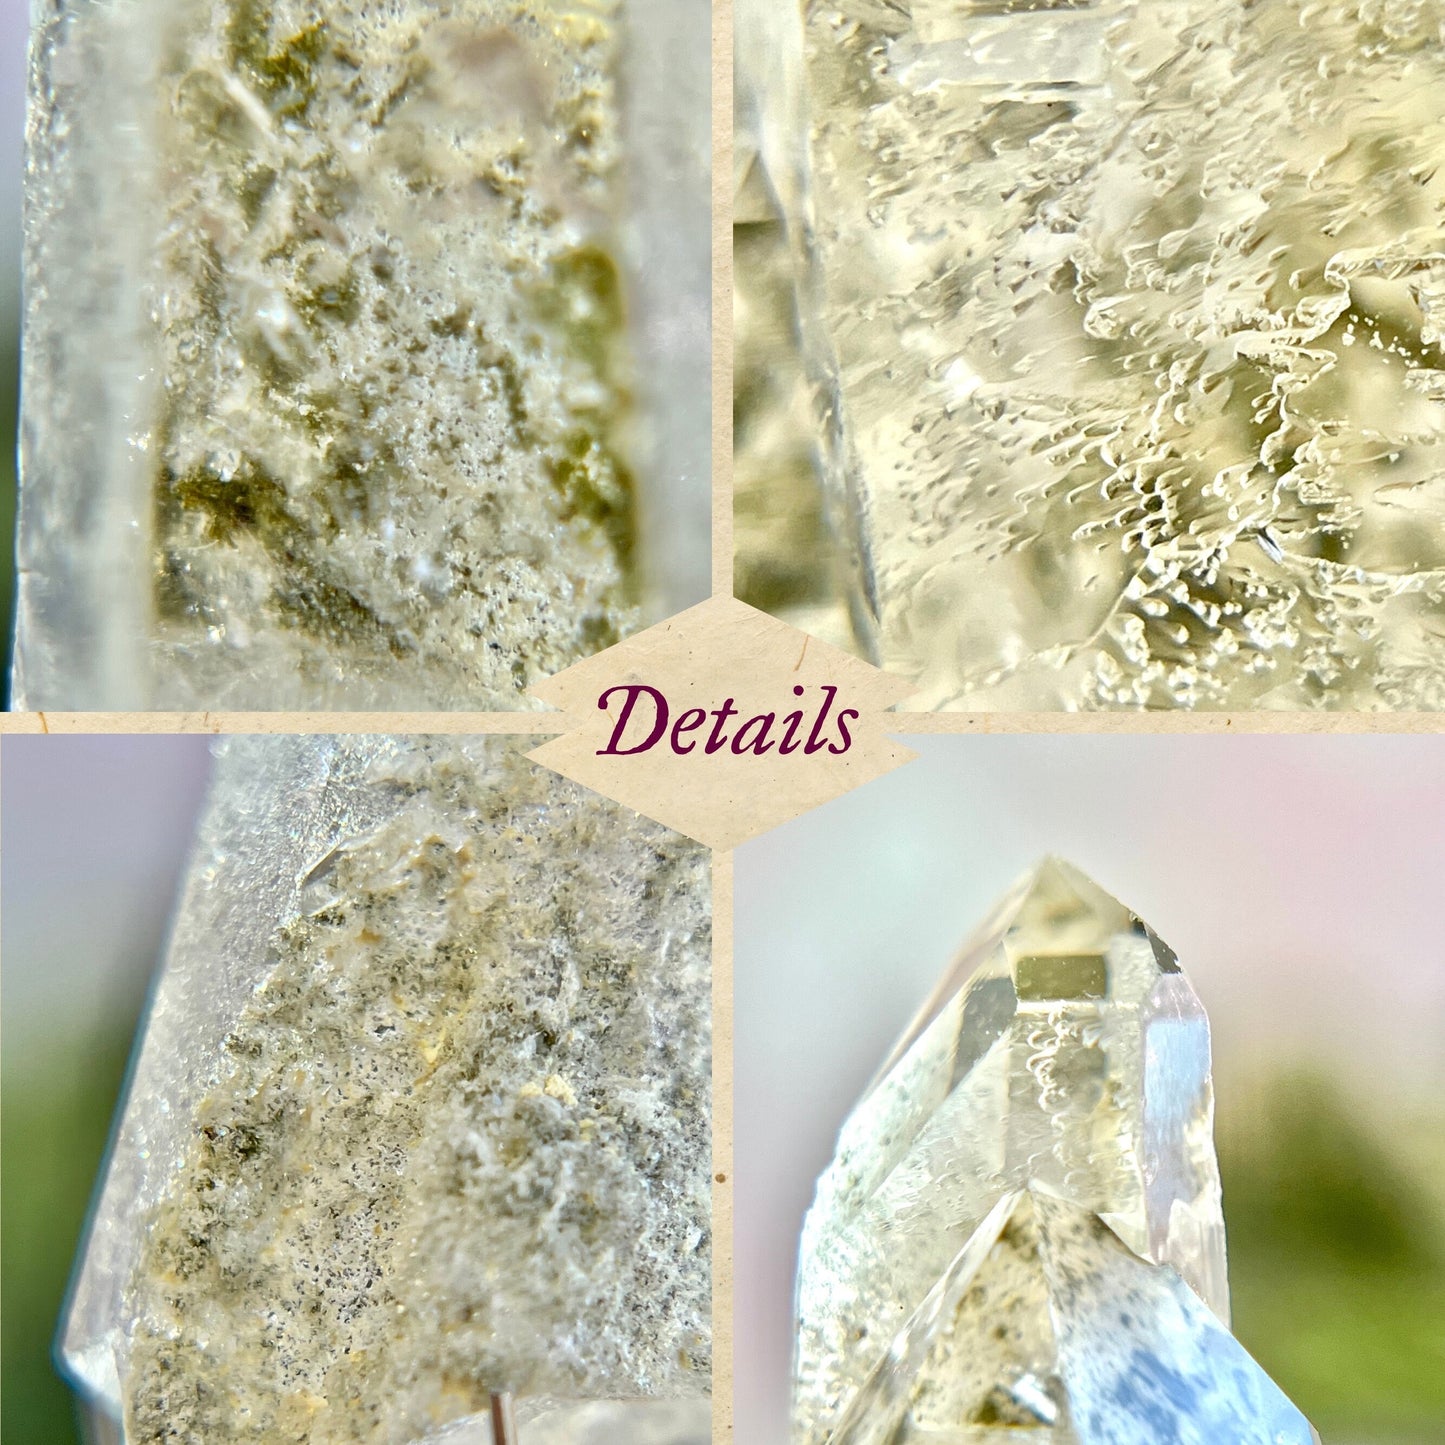 Details of a small garden Quartz crystal point with chlorite inclusions. This mineral specimen is also called Lodolite, and is natural.